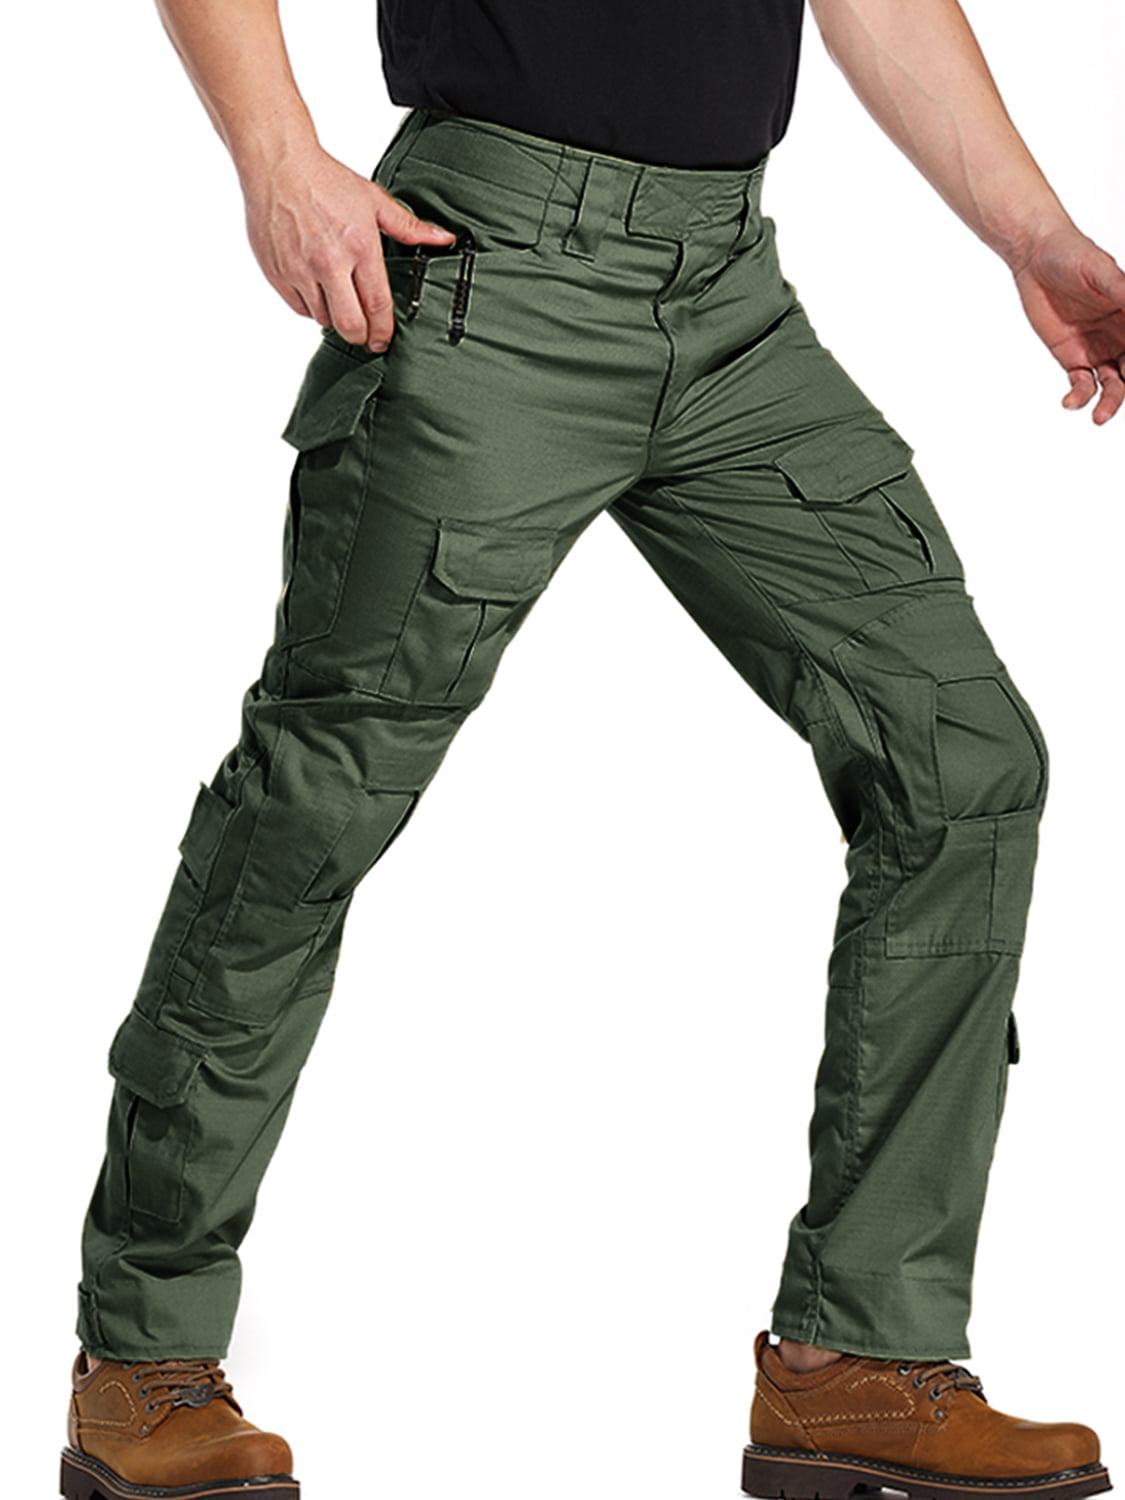 Outdoor Tactical Camo Hiking Pants Multi-Pocket Relaxed Fit Cotton Casual Work Pants TRGPSG Men's Cargo Pants 